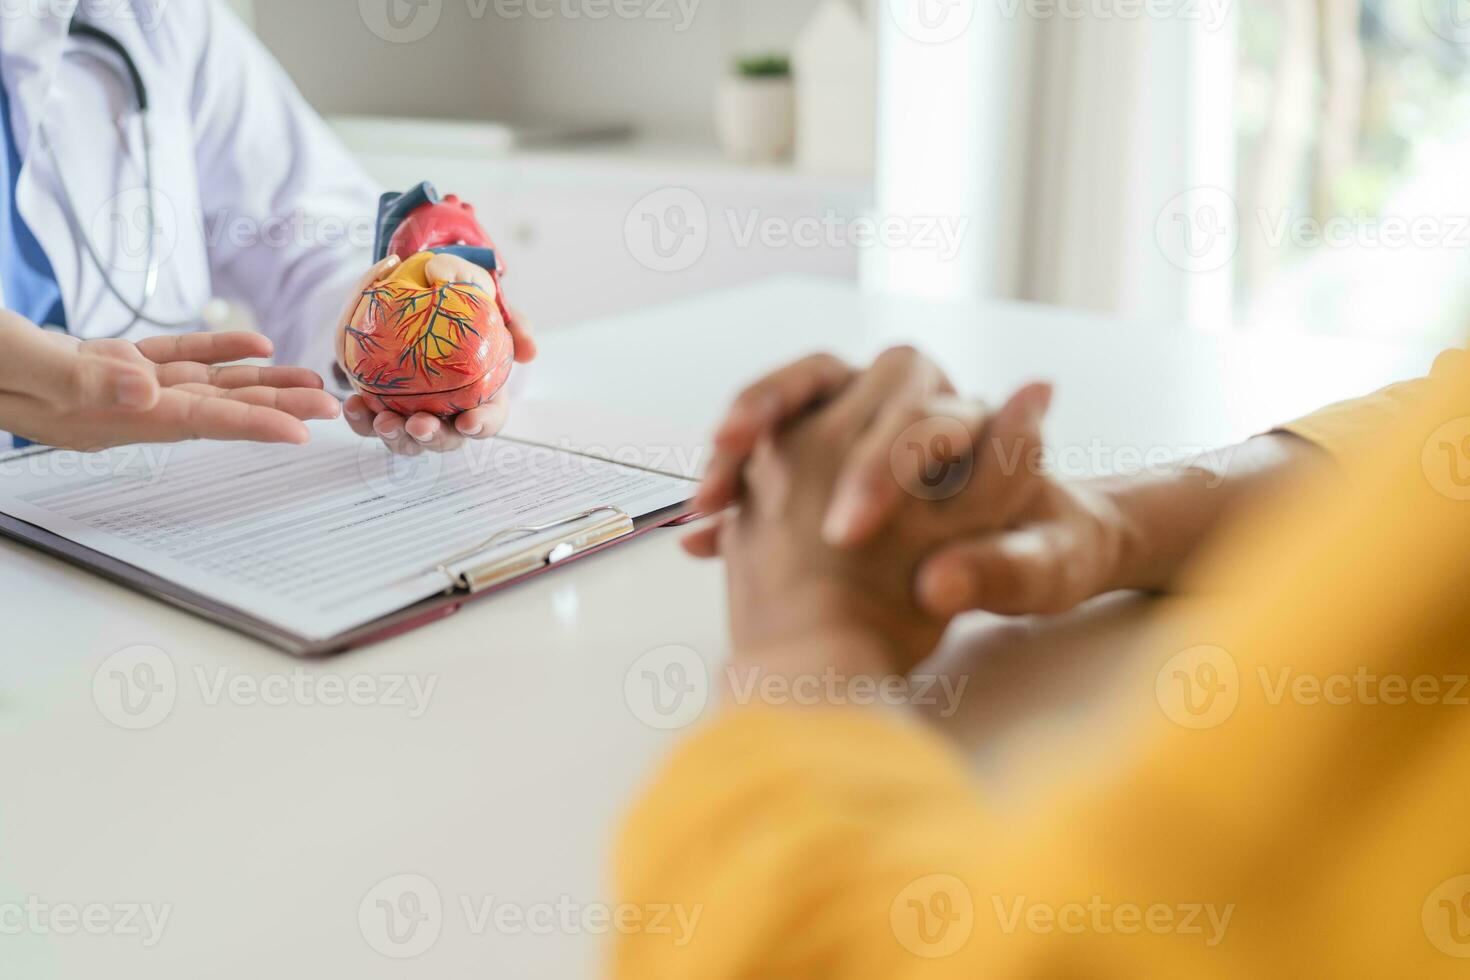 Cardiology Consultation treatment of heart disease. Doctor cardiologist while consultation showing anatomical model of human heart with aged patient talking about heart diseases. photo